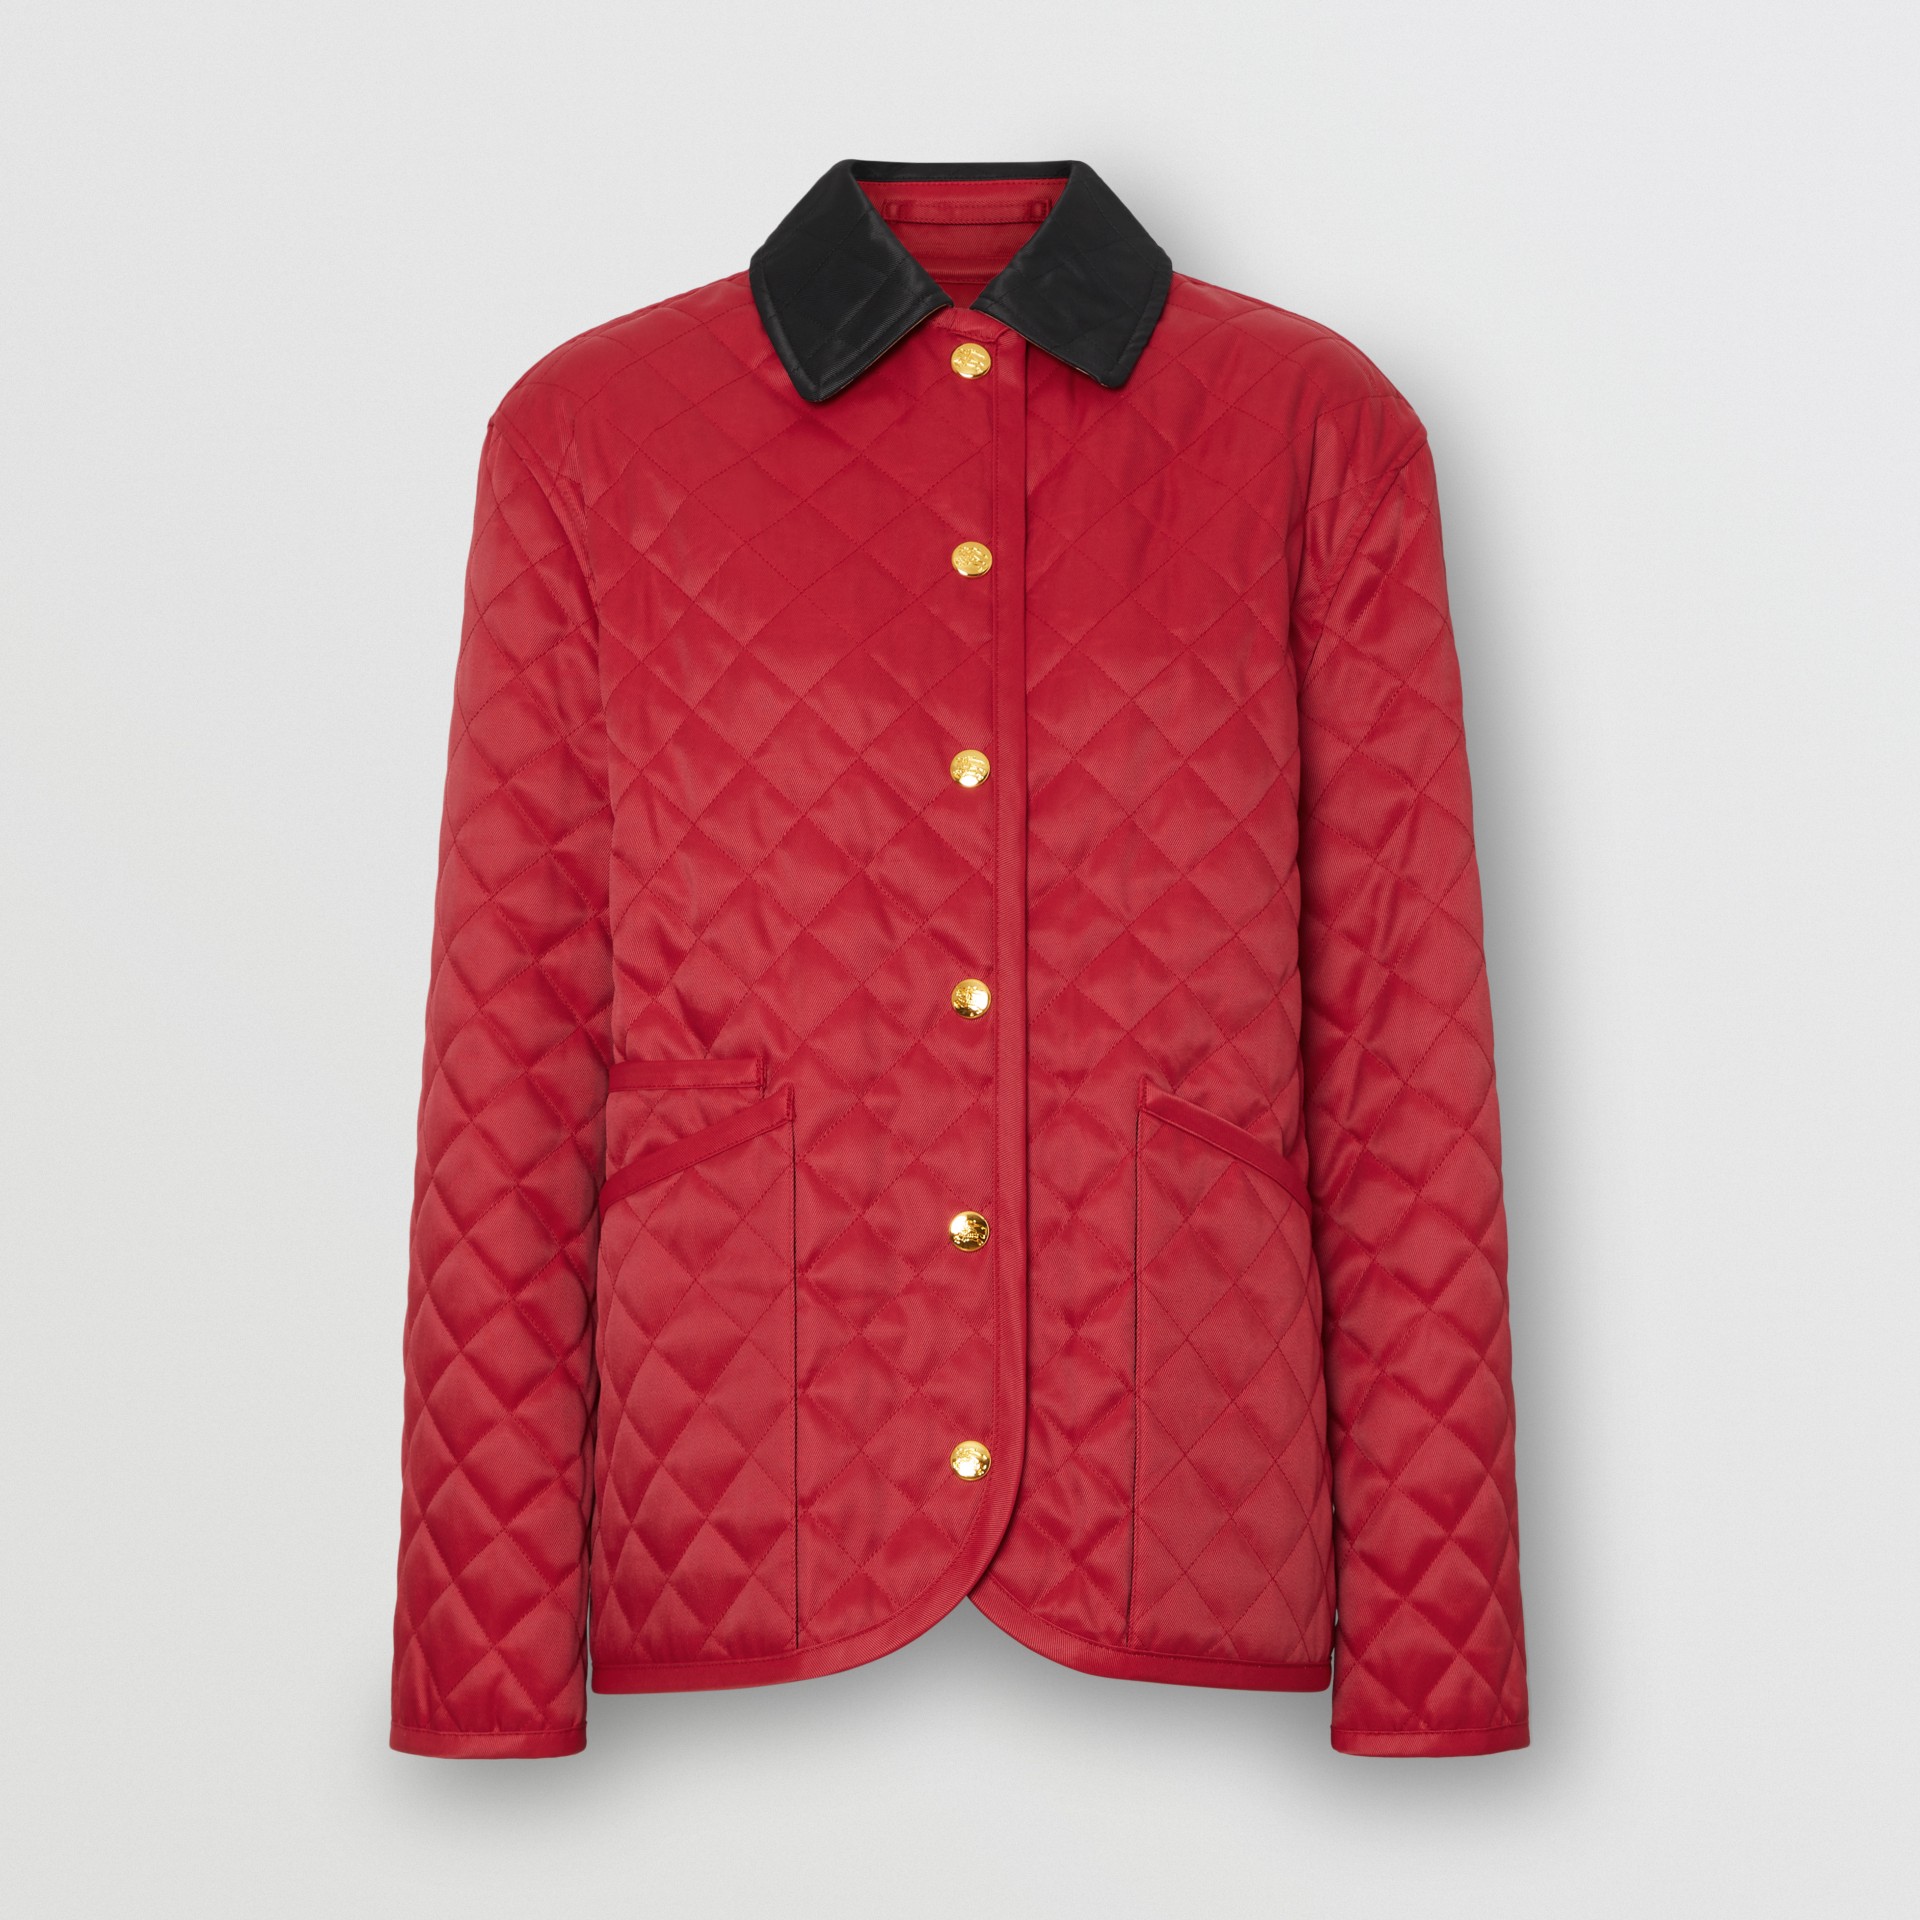 Diamond Quilted Barn Jacket in Red - Women | Burberry United States